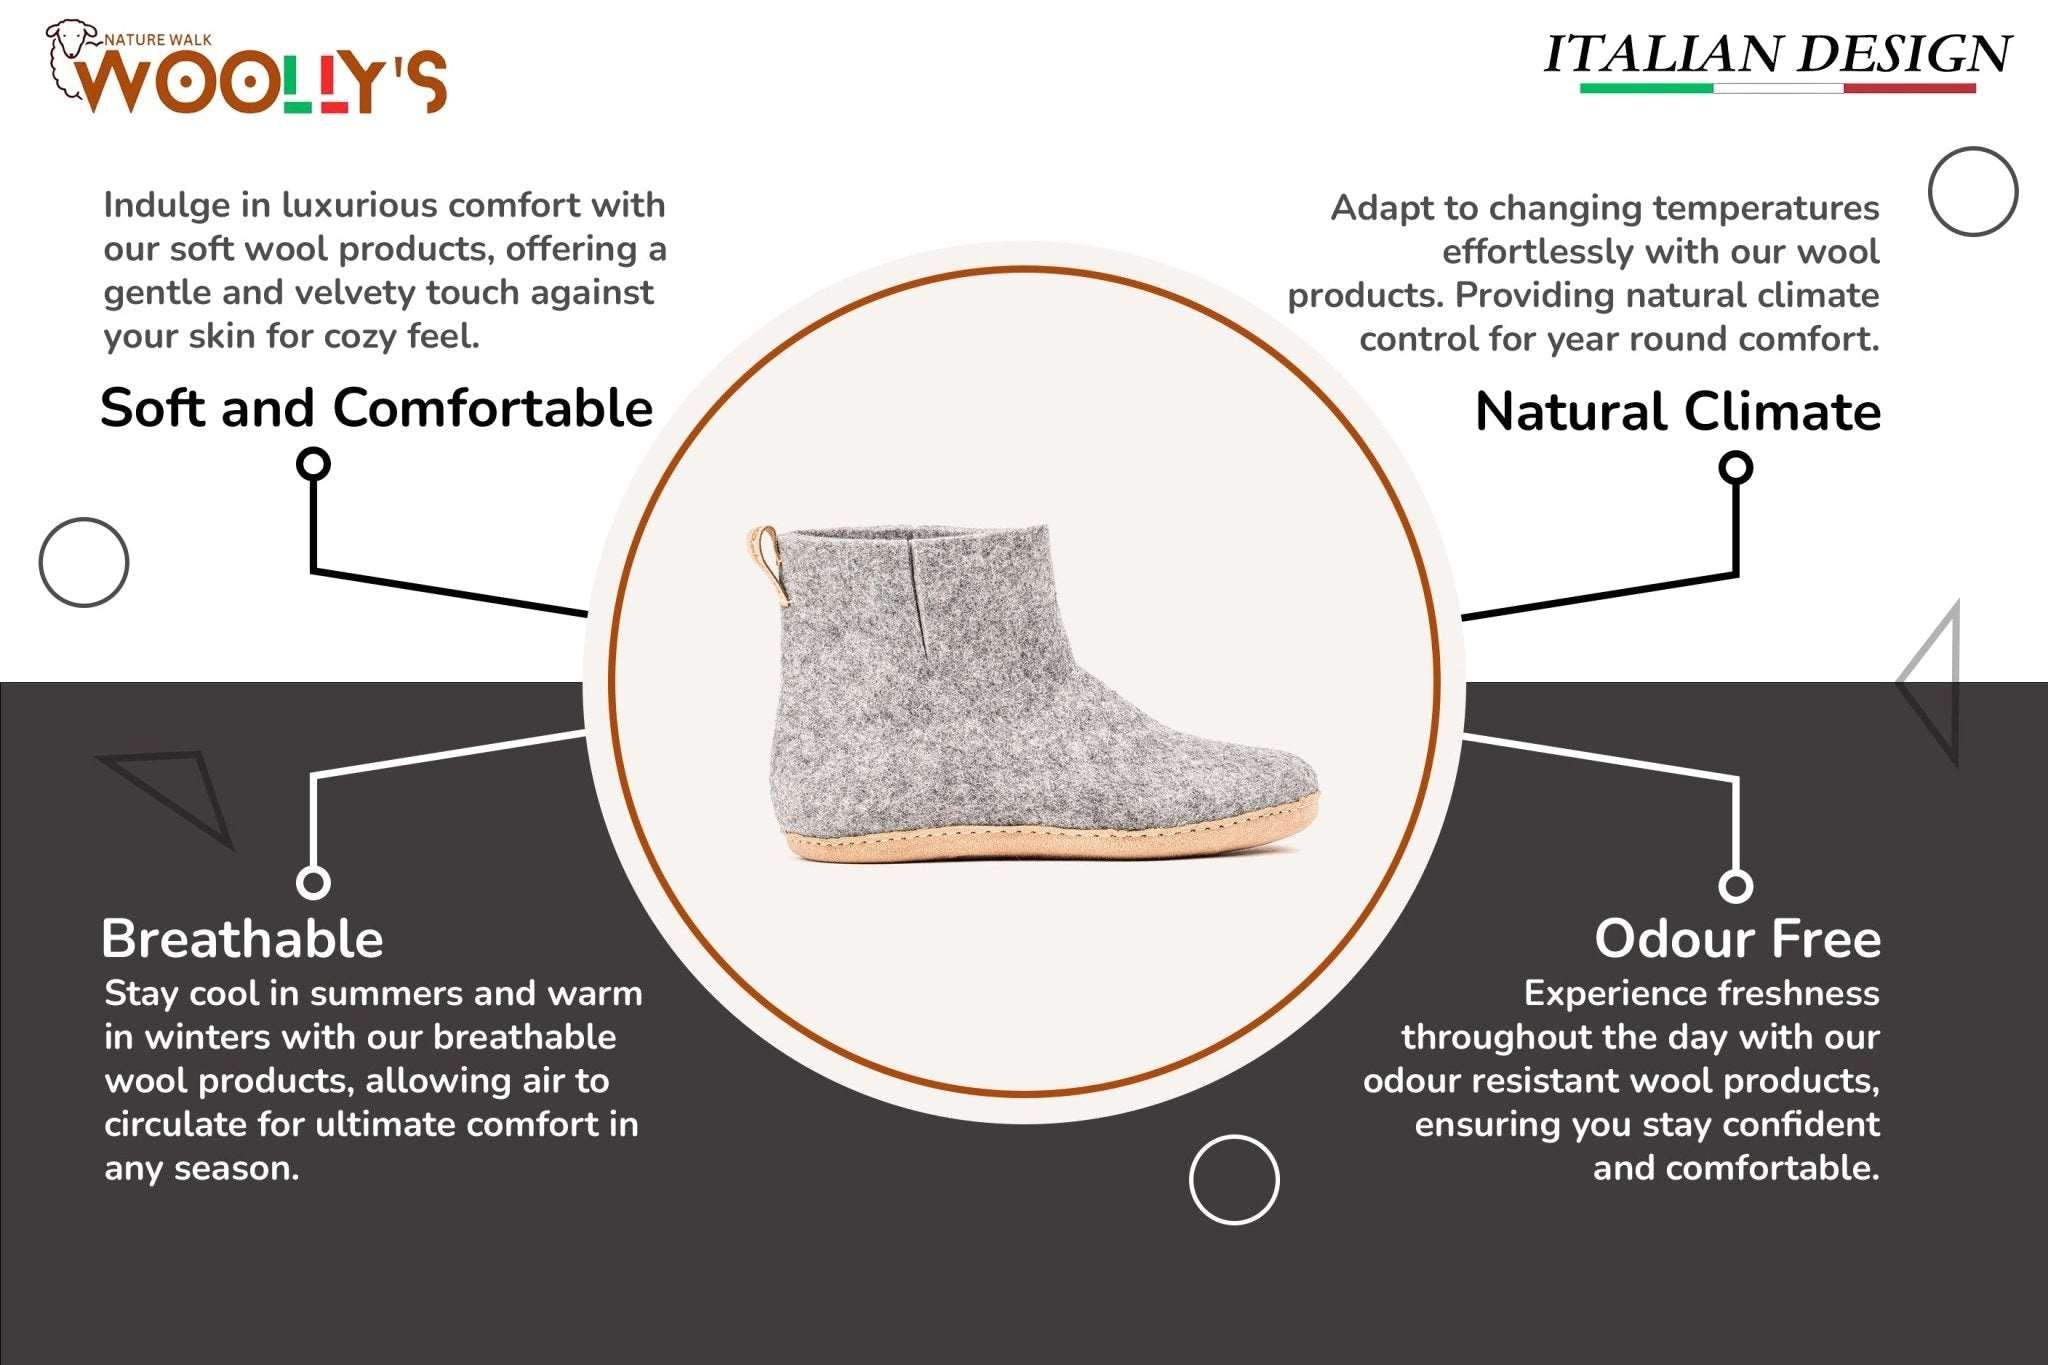 Indoor Boots With Leather Sole - Natural Grey - Woollyes